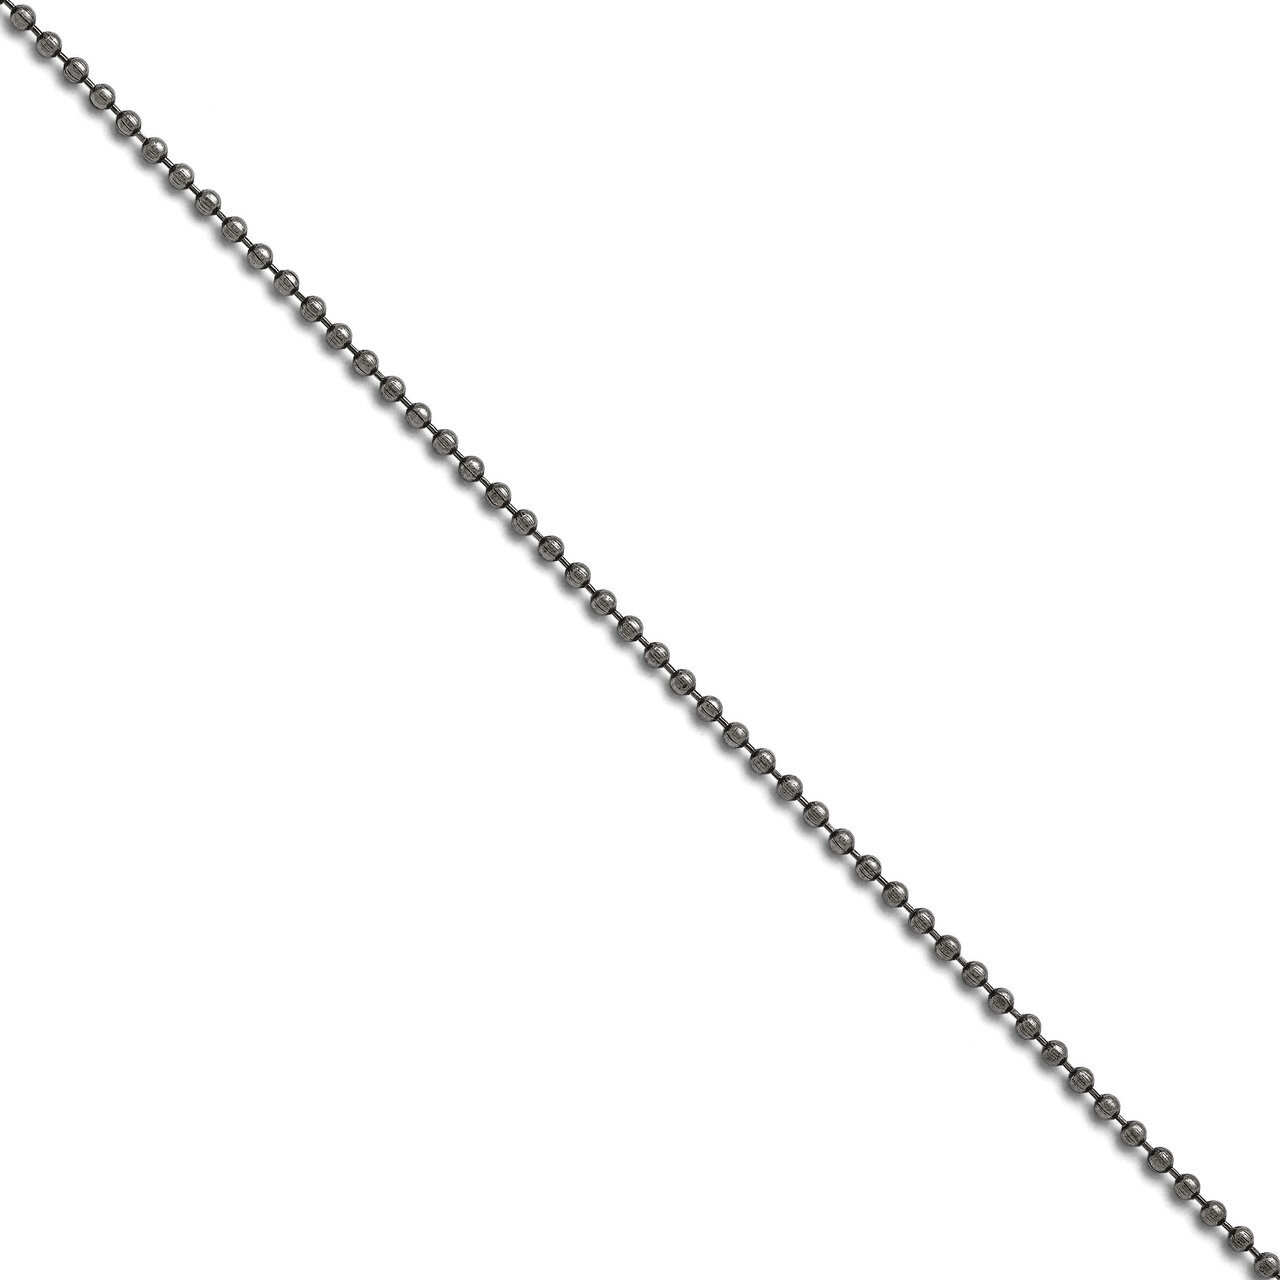 2.40 mm 18 inch Beaded Ball Antiqued Chain - Stainless Steel SRN1009